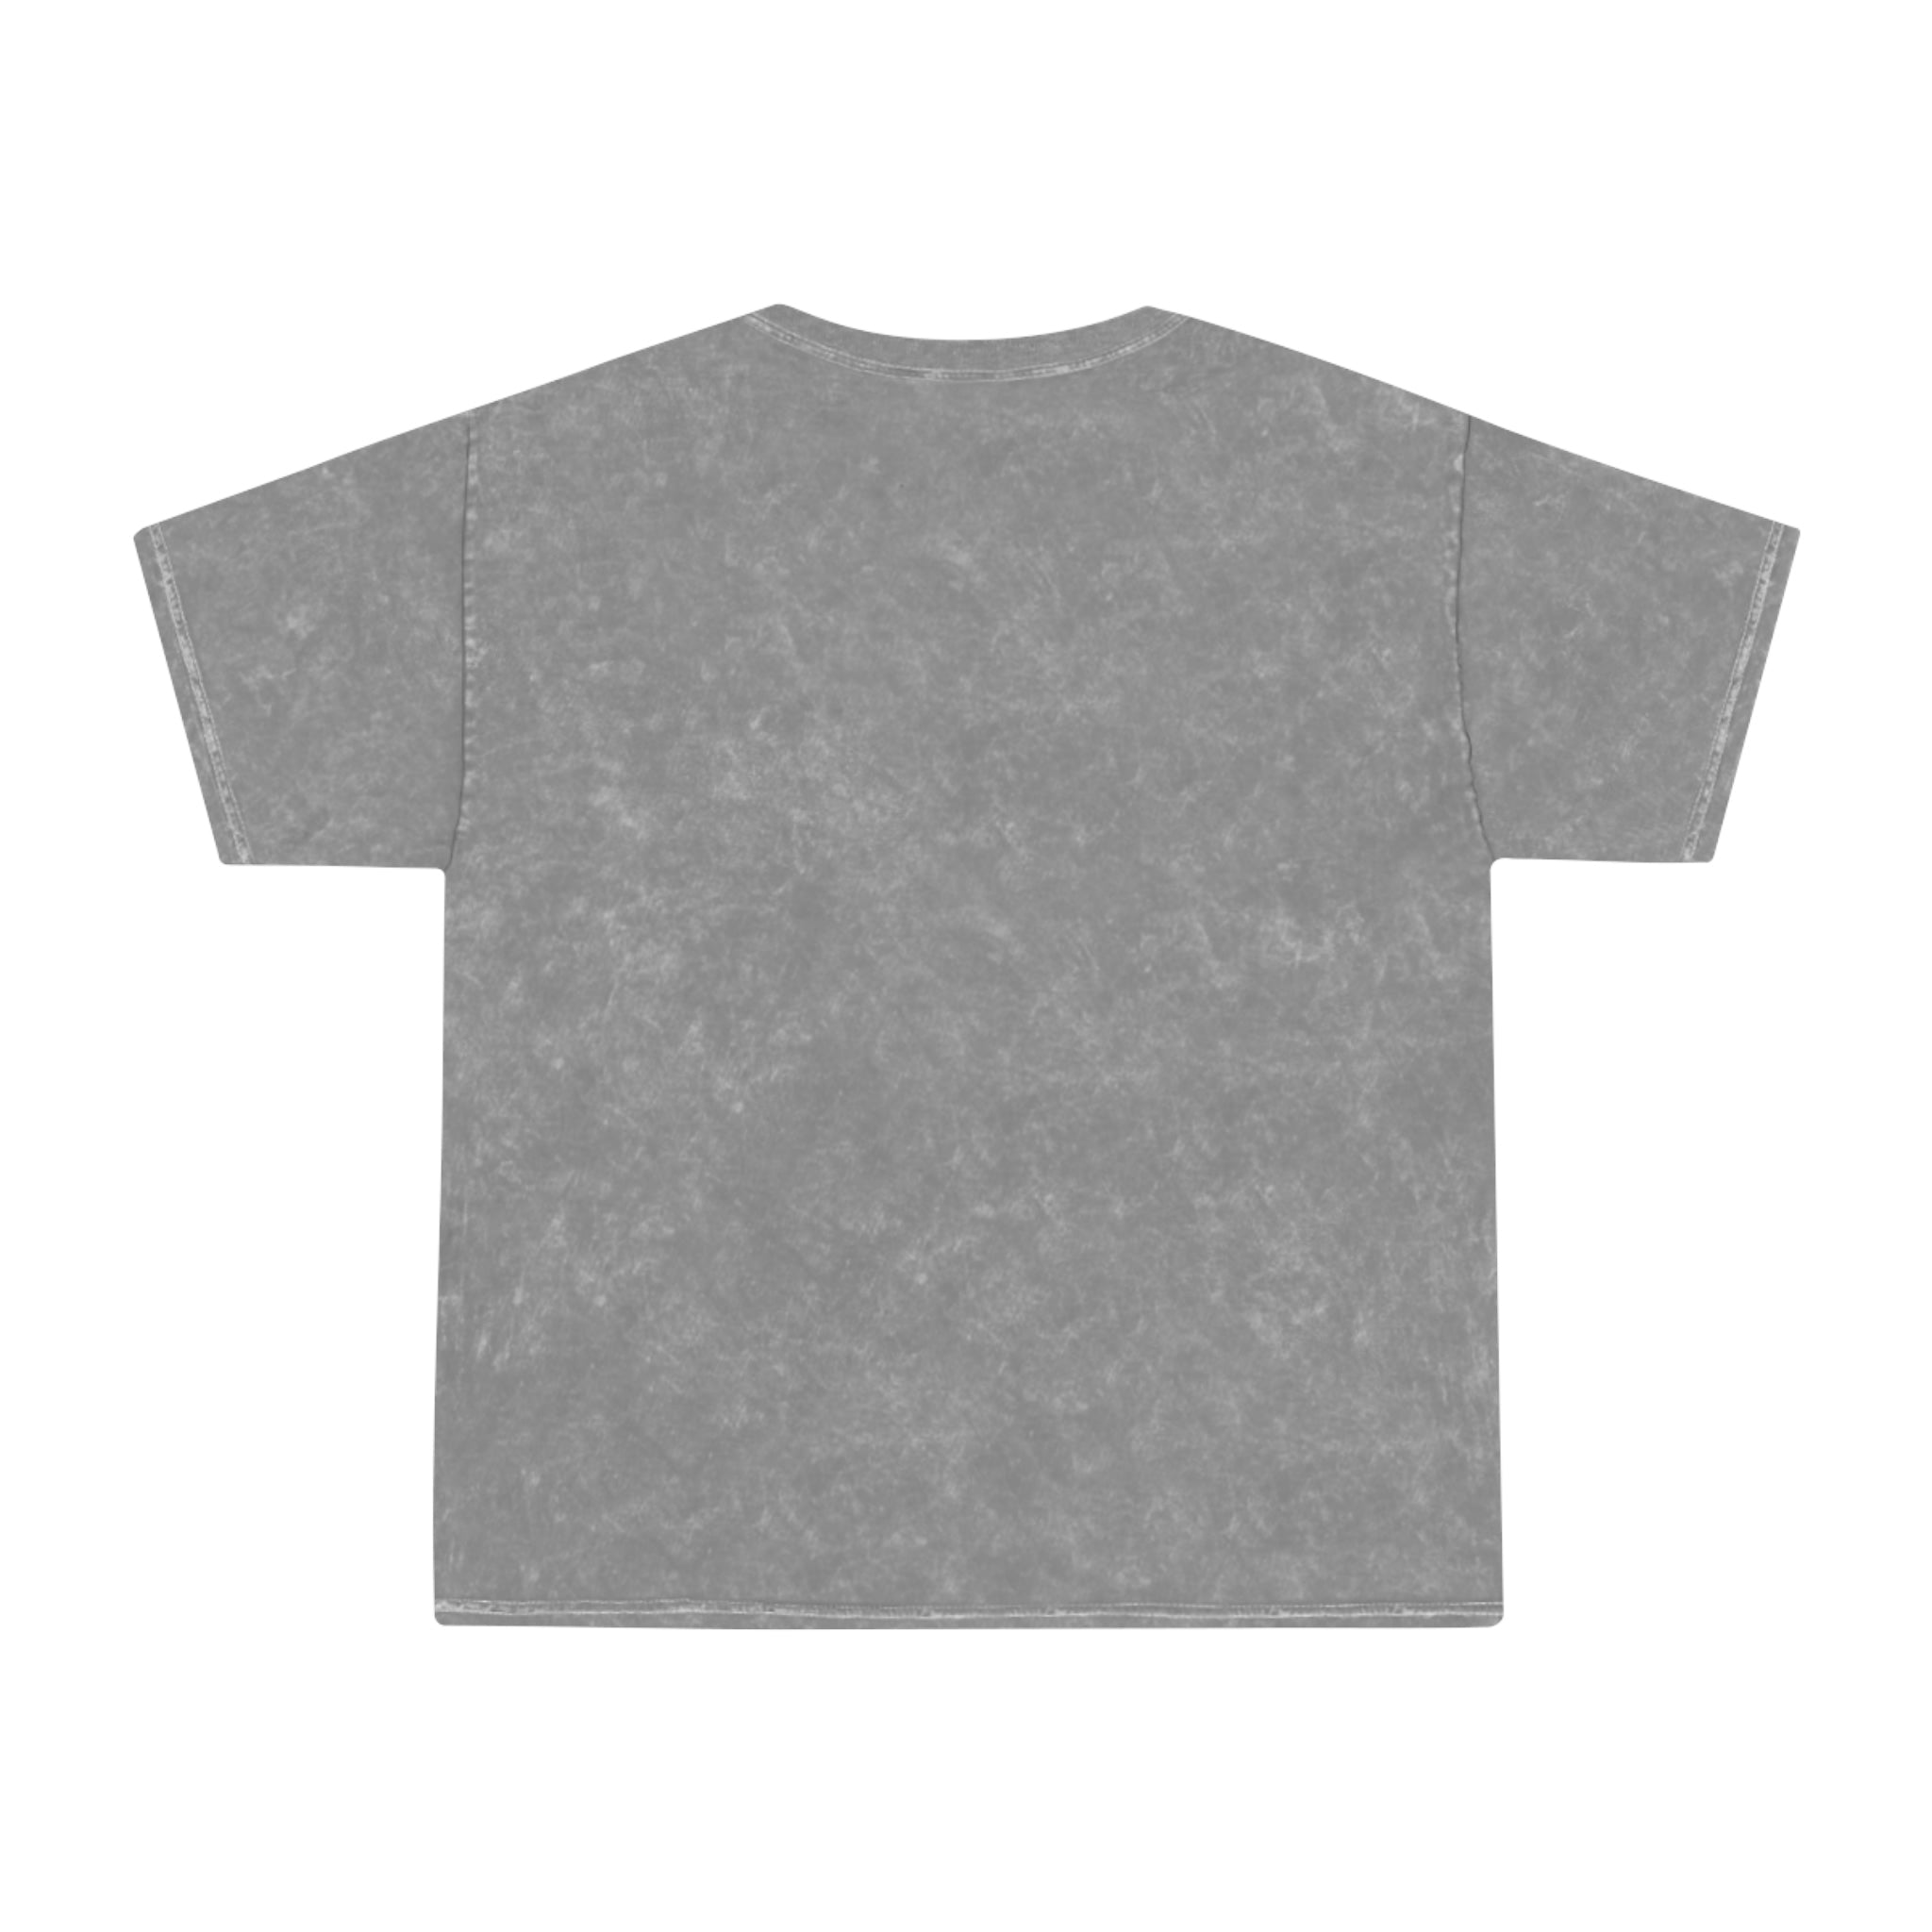 LOVED Mineral Wash Tee